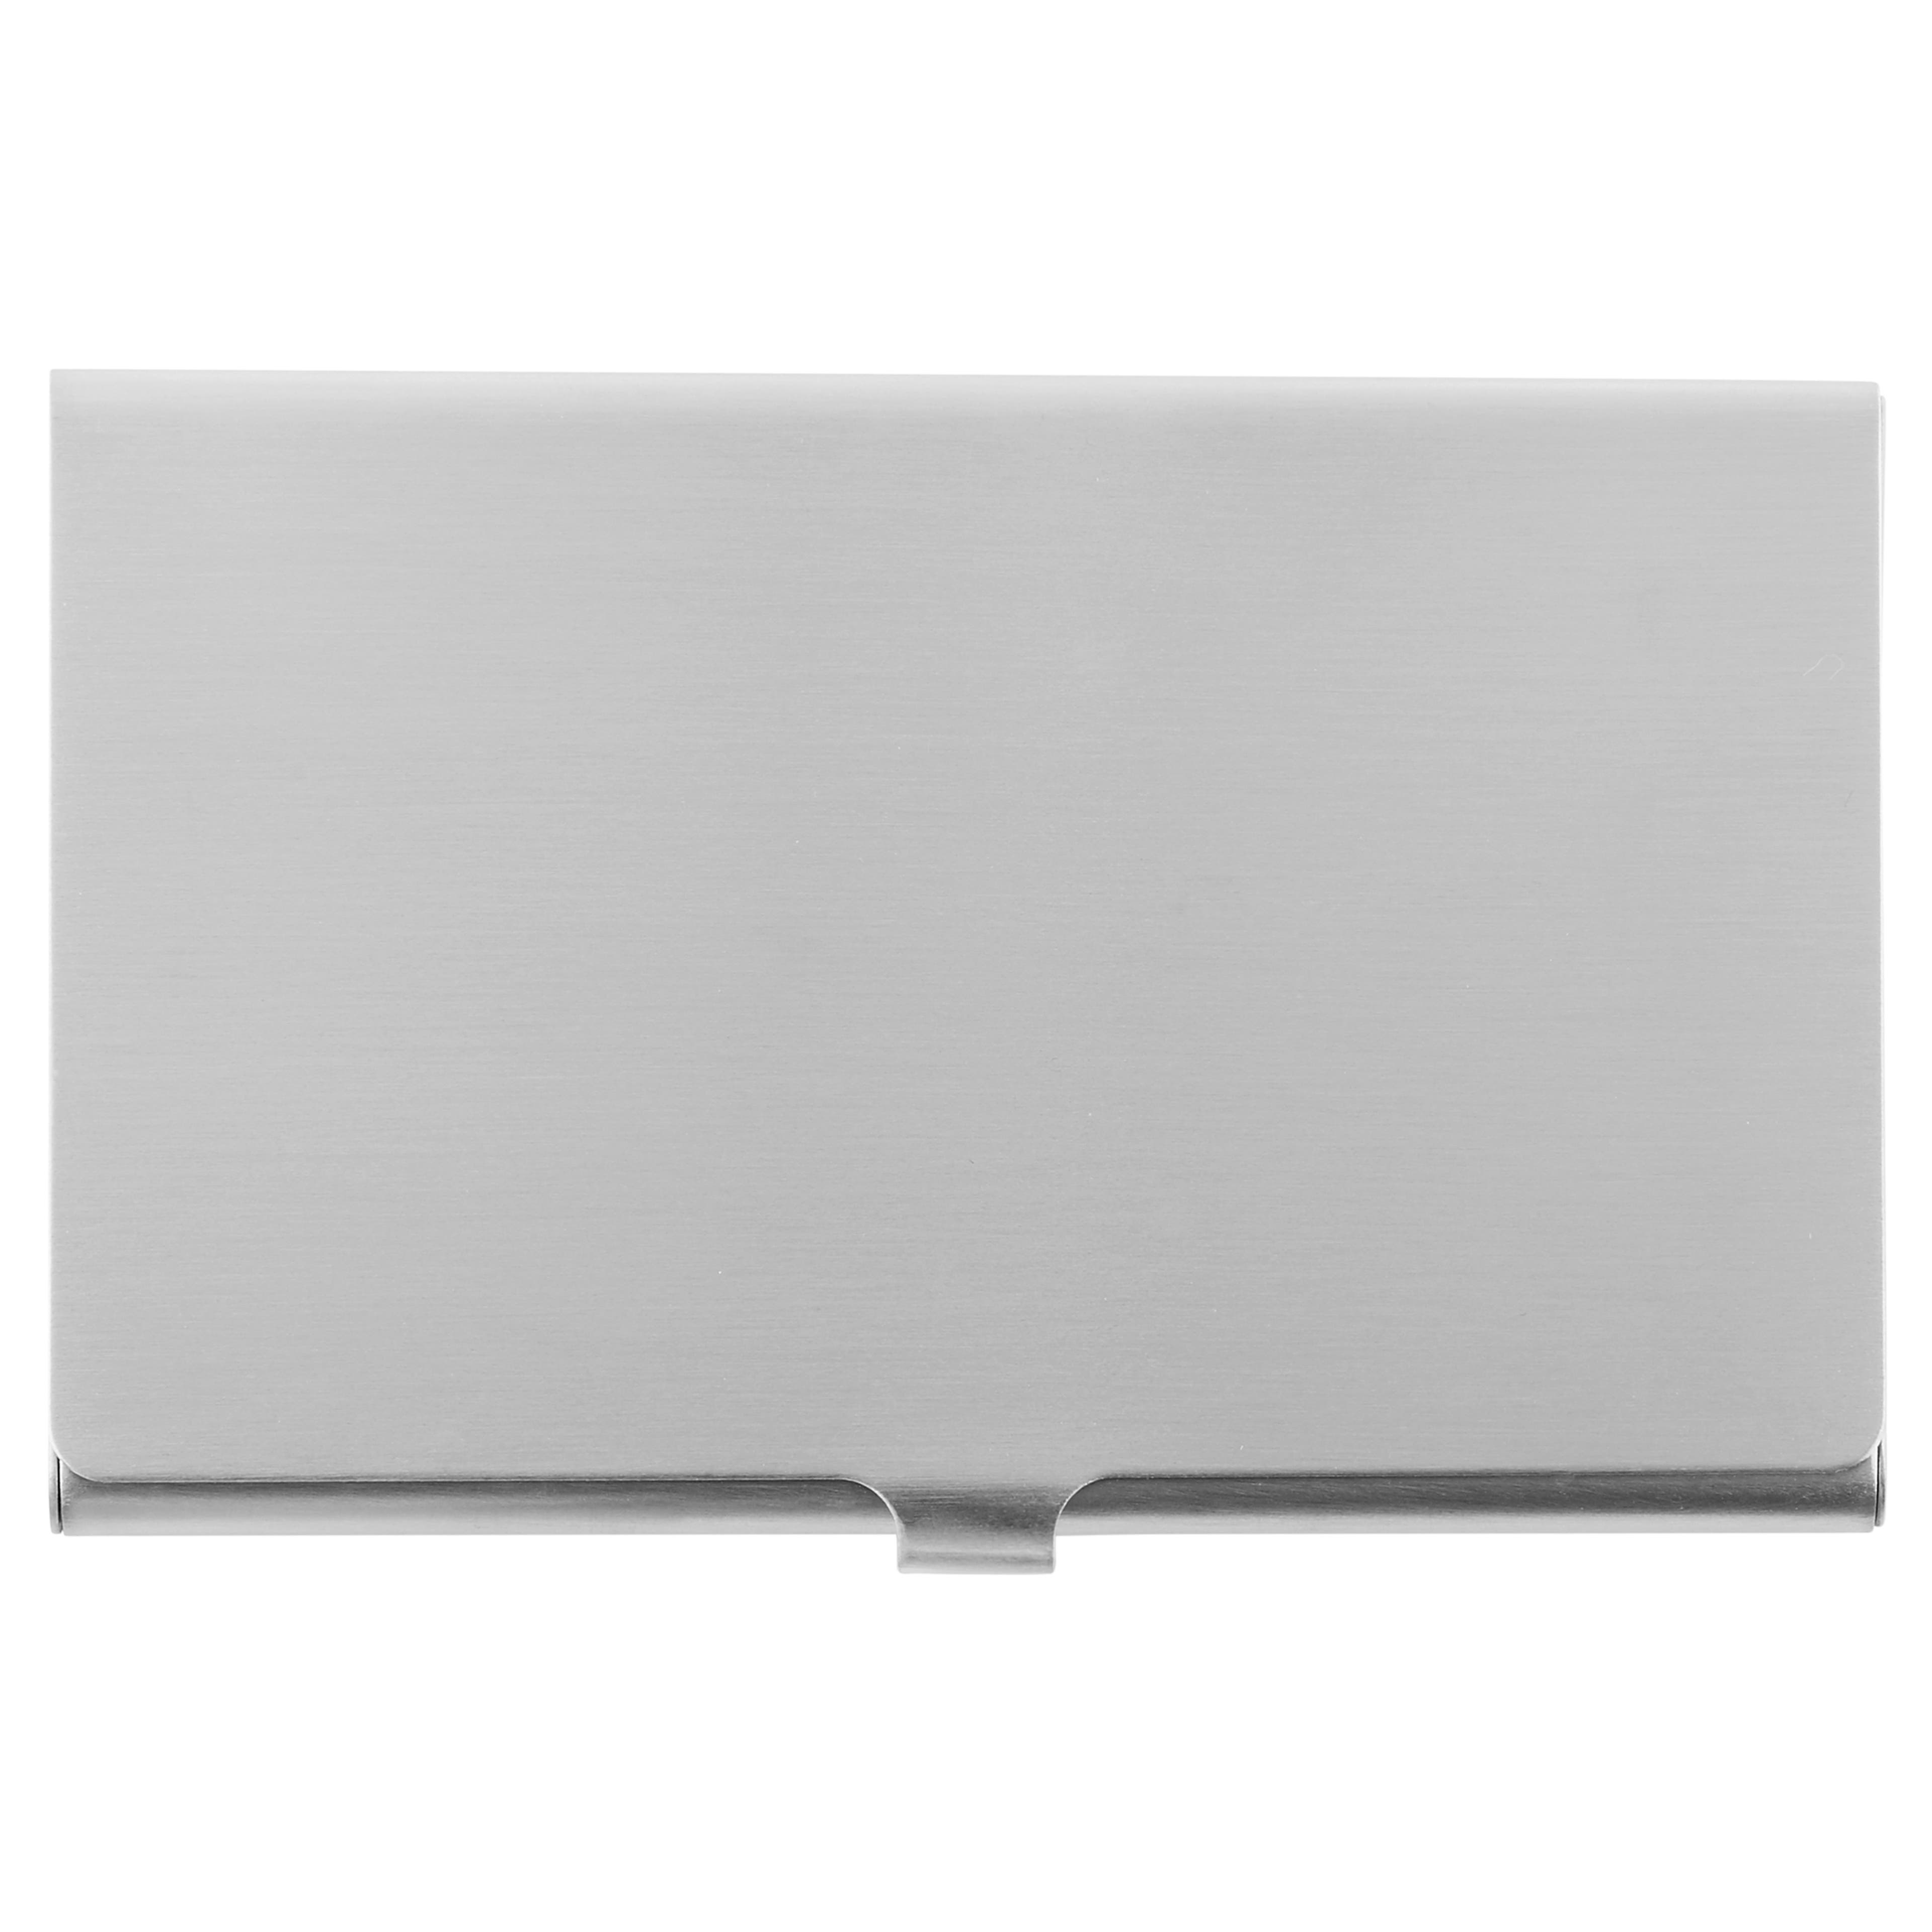 Slim Brushed Silver-Tone Stainless Steel Card Holder